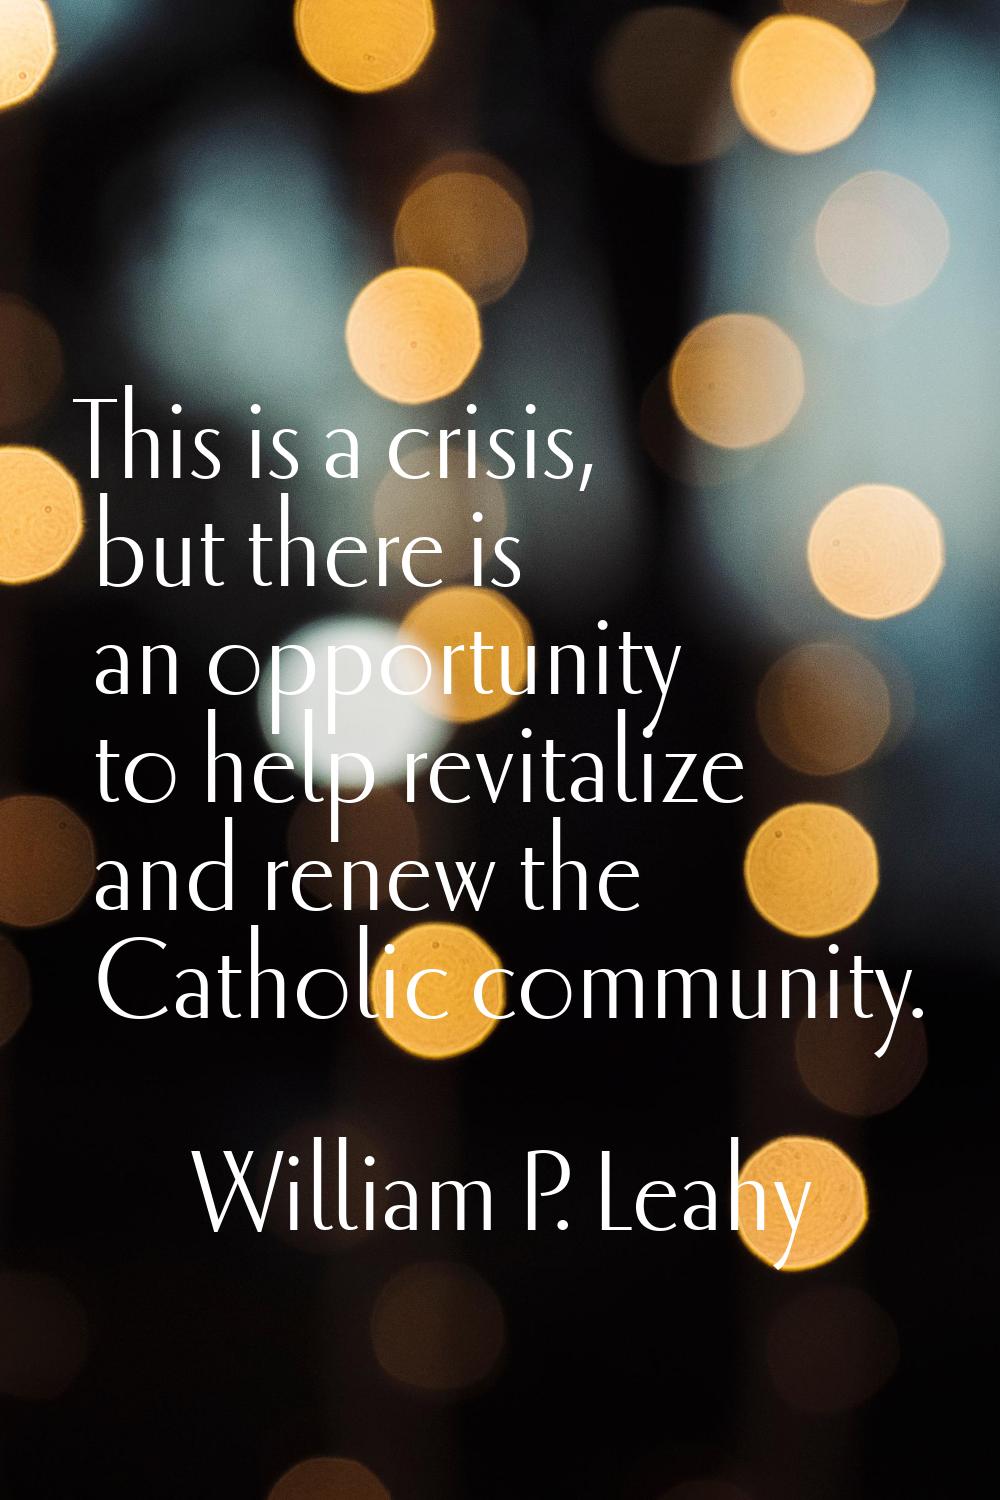 This is a crisis, but there is an opportunity to help revitalize and renew the Catholic community.